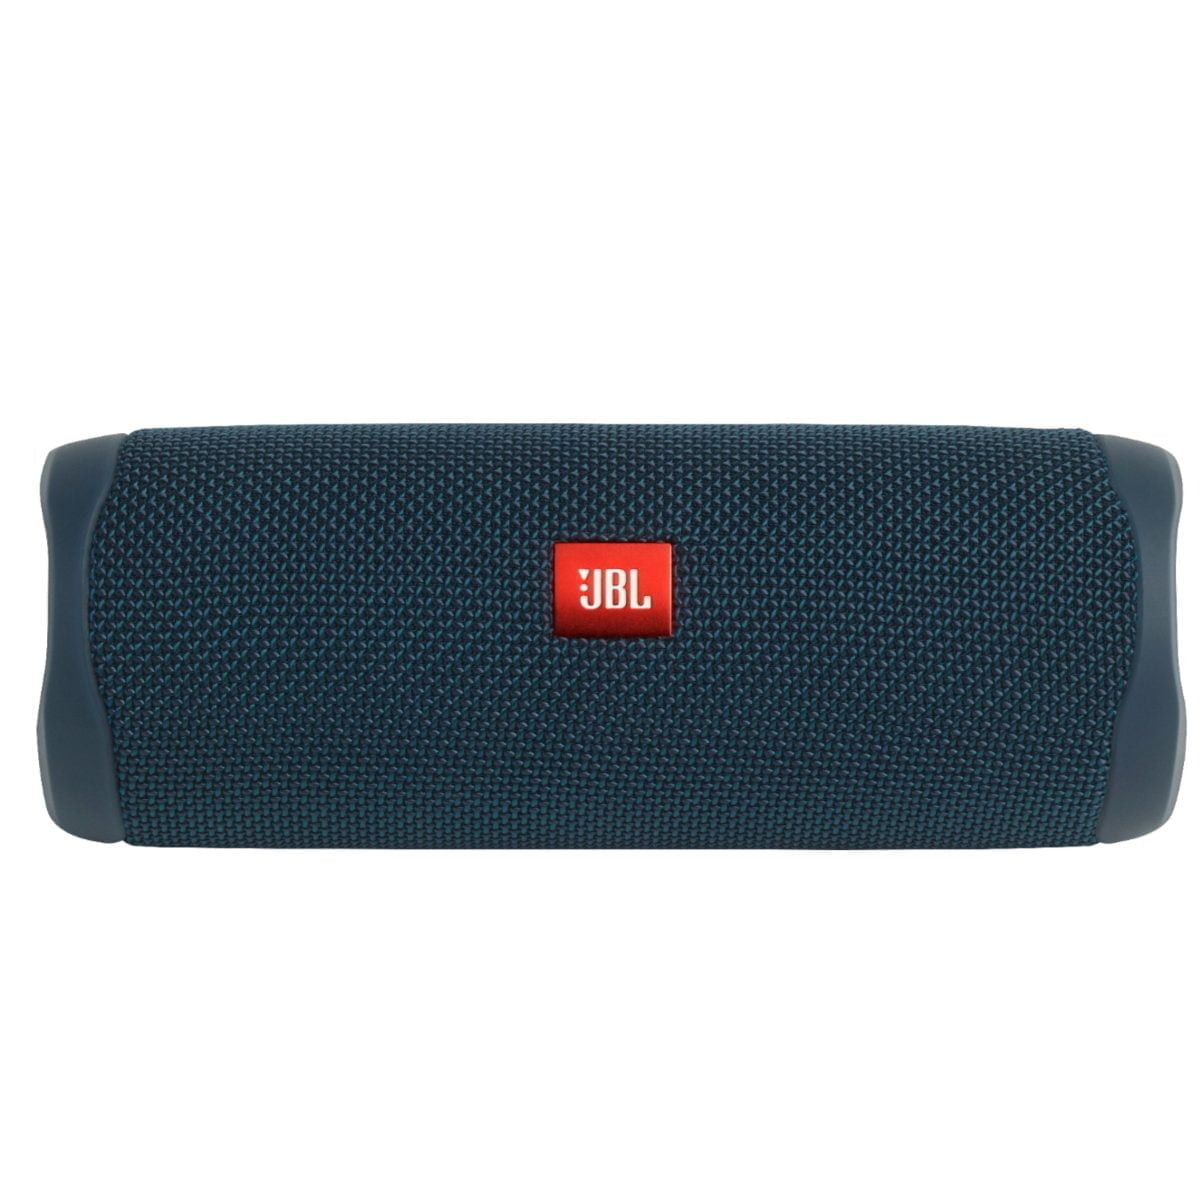 6356539Ld Scaled Jbl &Lt;H1&Gt;Jbl Flip 5 Portable Bluetooth Wireless Speaker - Ocean Blue&Lt;/H1&Gt; Https://Www.youtube.com/Watch?V=C8K7Ldyhyfm &Lt;Ul&Gt; &Lt;Li&Gt;&Lt;Span Class=&Quot;A-List-Item&Quot;&Gt;Sounds Better Than Ever, Feel Your Music. Flip 5’S All New Racetrack-Shaped Driver Delivers High Output. Enjoy Booming, Bass In A Compact Package. &Lt;/Span&Gt;&Lt;/Li&Gt; &Lt;Li&Gt;&Lt;Span Class=&Quot;A-List-Item&Quot;&Gt; Make A Splash With Ipx7 Waterproof Design. Flip 5 Is Ipx7 Waterproof Up To Three-Feet Deep For Fearless Outdoor Entertainment. &Lt;/Span&Gt;&Lt;/Li&Gt; &Lt;Li&Gt;&Lt;Span Class=&Quot;A-List-Item&Quot;&Gt; Crank Up The Fun With Party Boost, Party Boost Allows You To Pair Two Jbl Party Boost-Compatible Speakers Together For Stereo, Sound Or To Pump Up Your Party. &Lt;/Span&Gt;&Lt;/Li&Gt; &Lt;Li&Gt;&Lt;Span Class=&Quot;A-List-Item&Quot;&Gt; Bring The Party Anywhere, Don’t Sweat The Small Stuff Like Charging Your Battery. Flip 5 Gives You More Than 12 Hours Of, Playtime. Keep The Music Going Longer And Louder With Jbl’s Signature Sound. &Lt;/Span&Gt;&Lt;/Li&Gt; &Lt;/Ul&Gt; Jbl Flip5 Jbl Flip 5 Portable Bluetooth Wireless Speaker - Ocean Blue